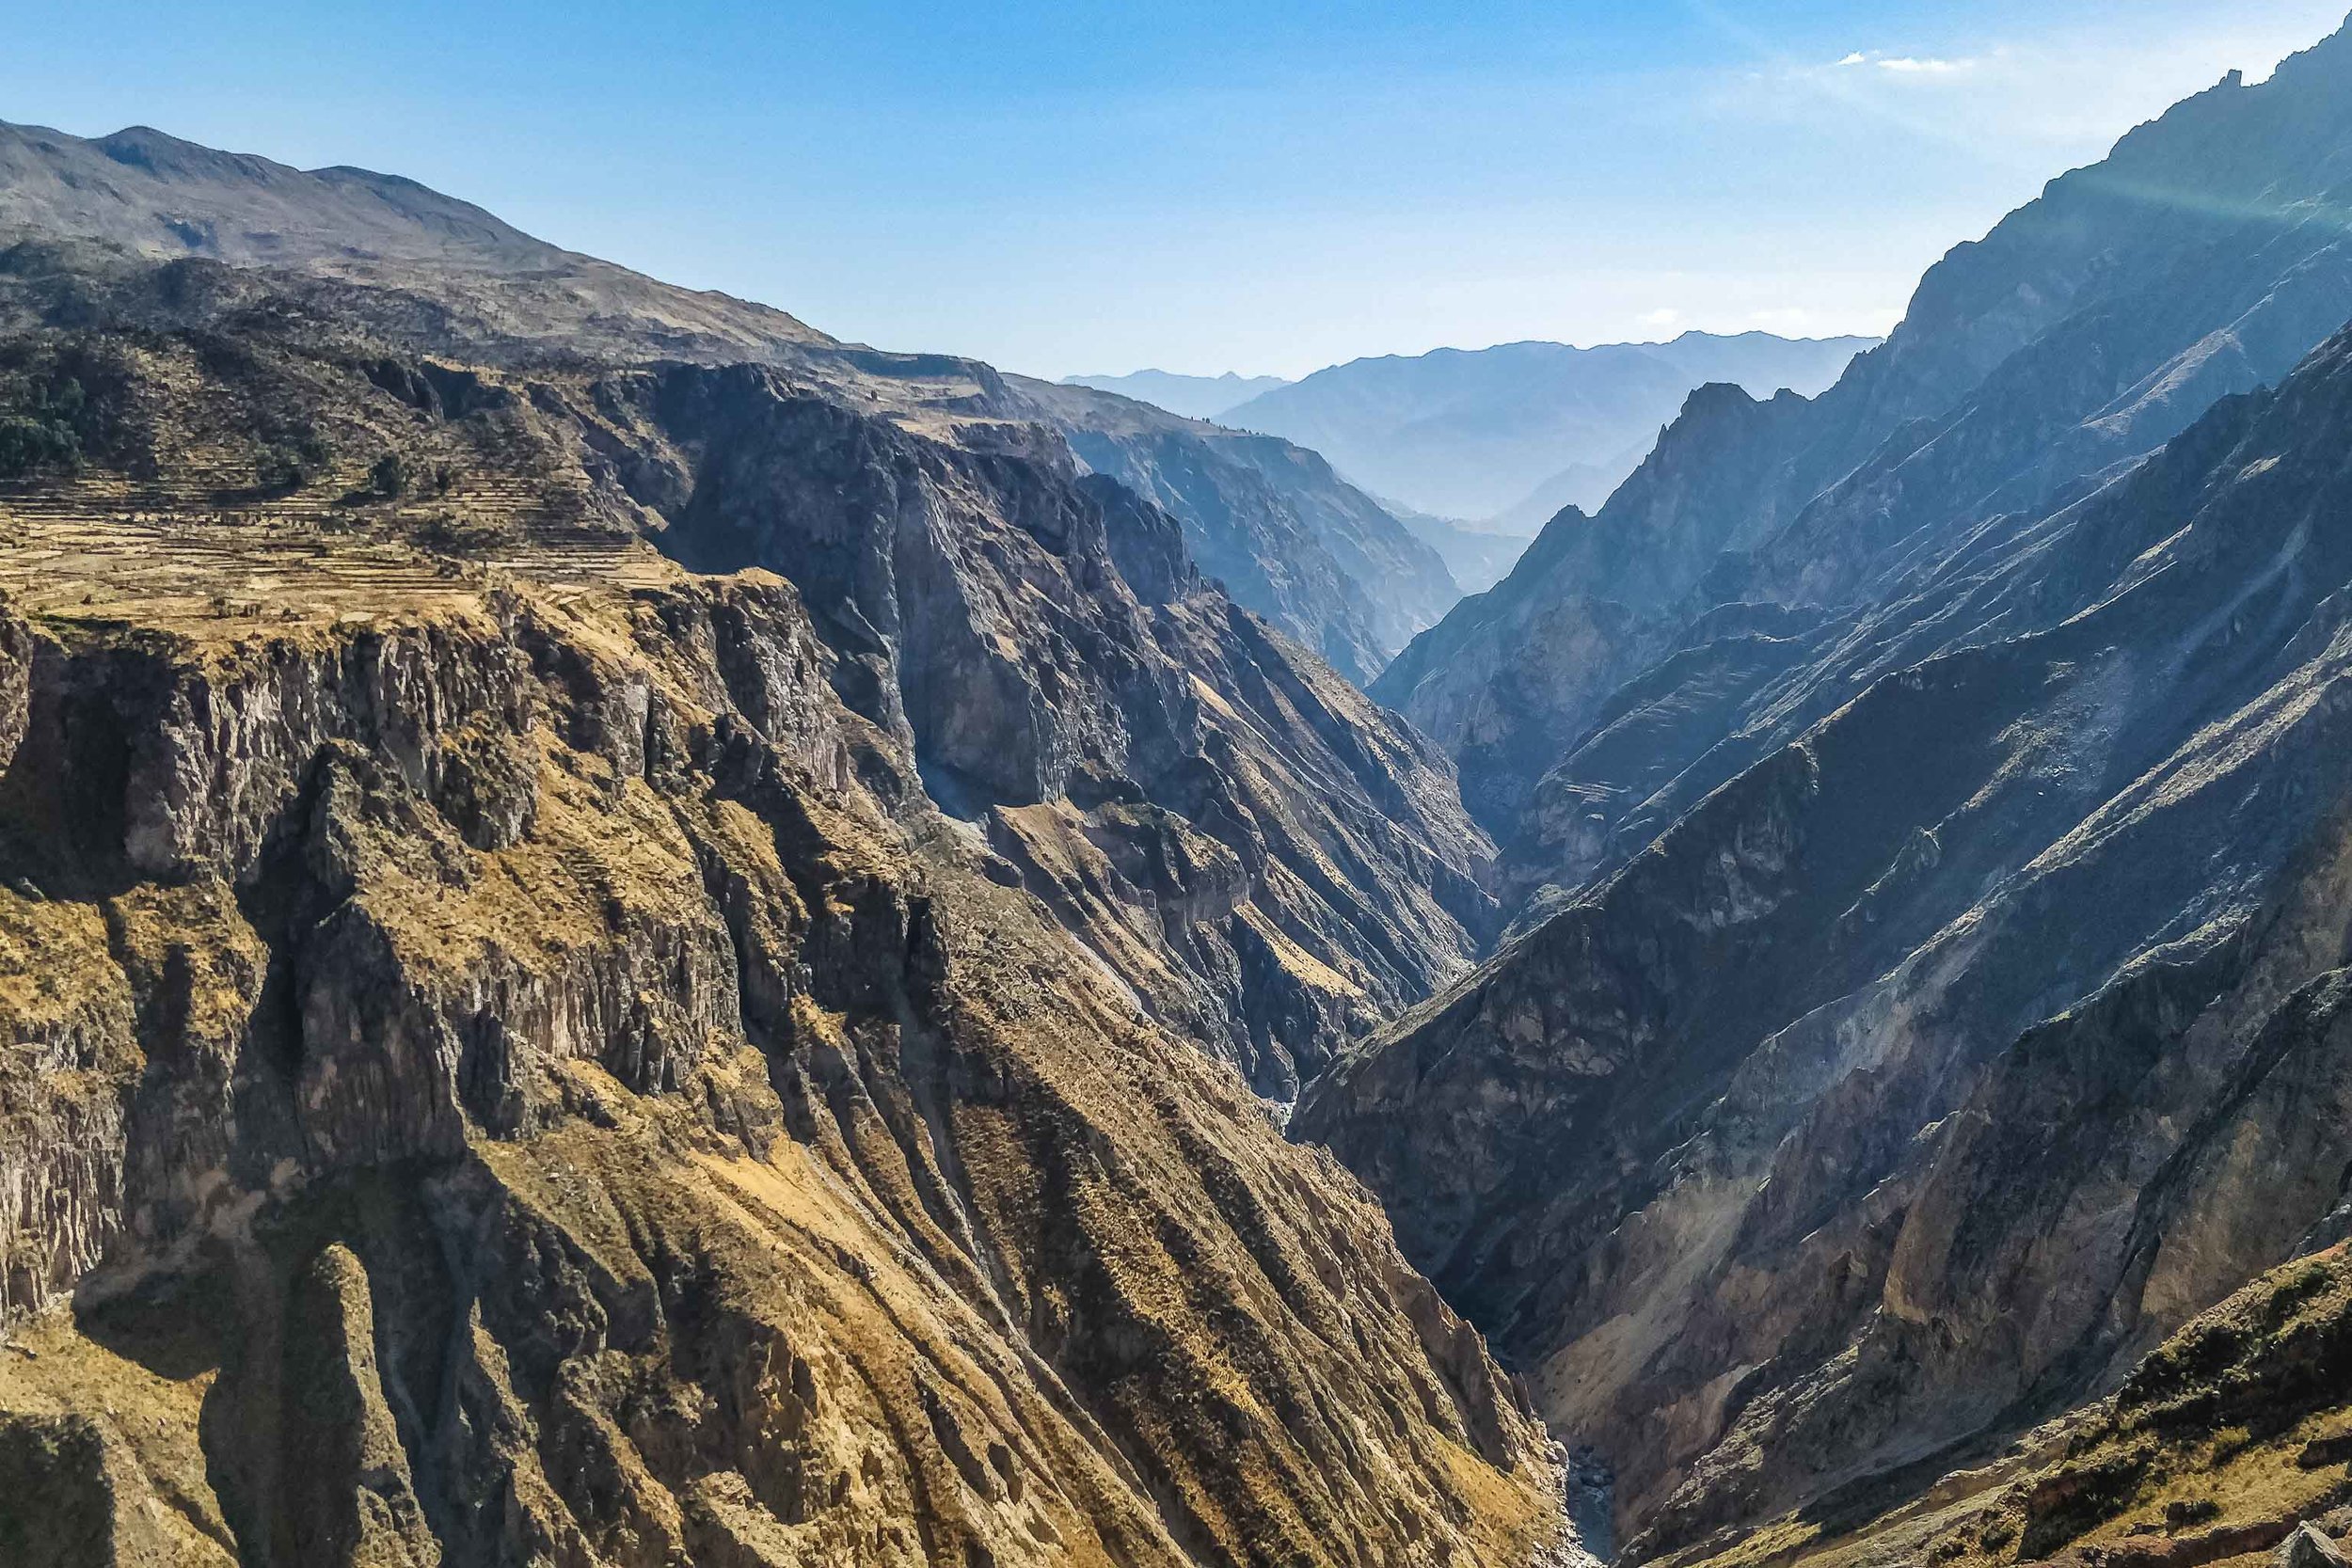 The Colca Canyon by Le Foyer Tours